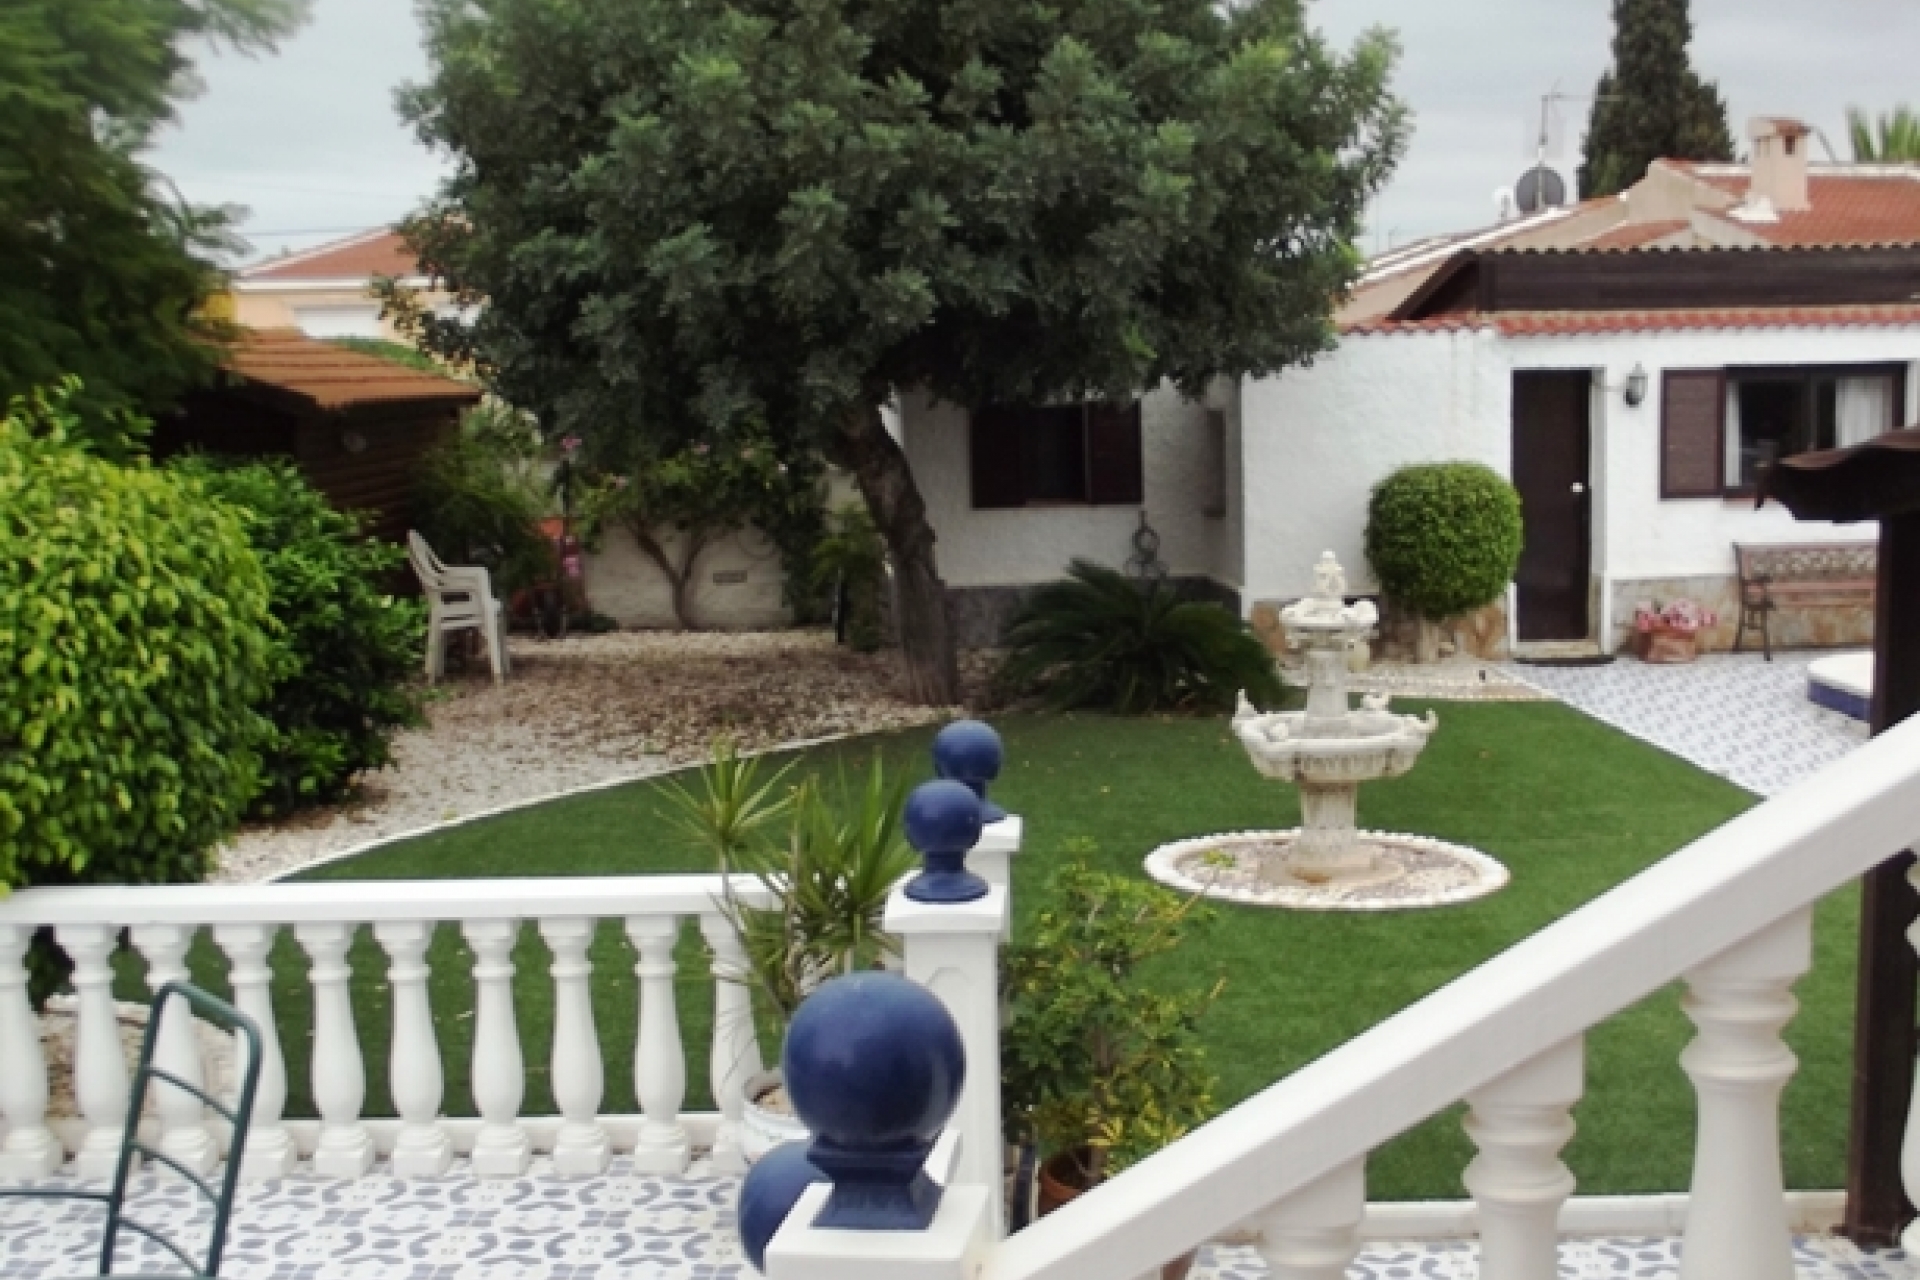 Cheap, bargain property in Ciudad Quesada for sale near Torrevieja and Guardamar on Spains Costa Blanca.